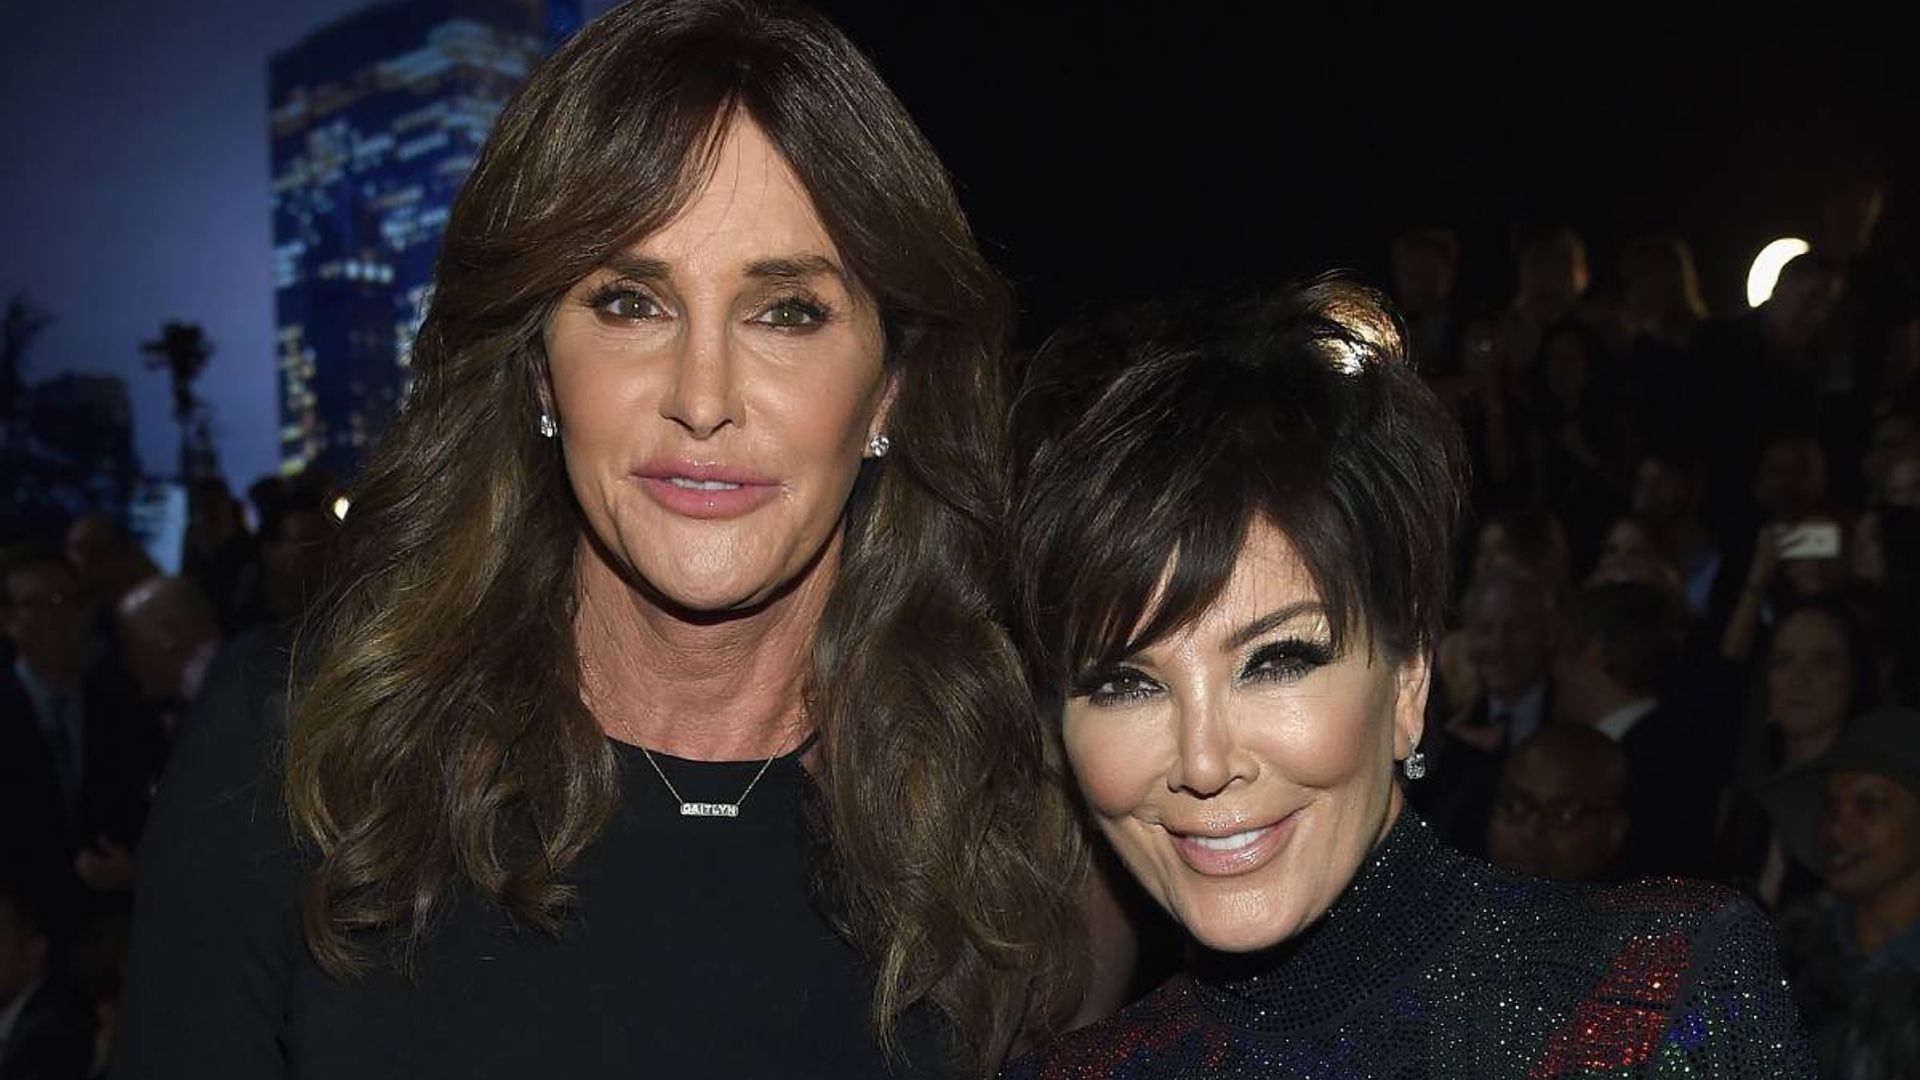 Caitlyn Jenner pays rare tribute to ex-wife Kris Jenner as she reveals she still helps her now